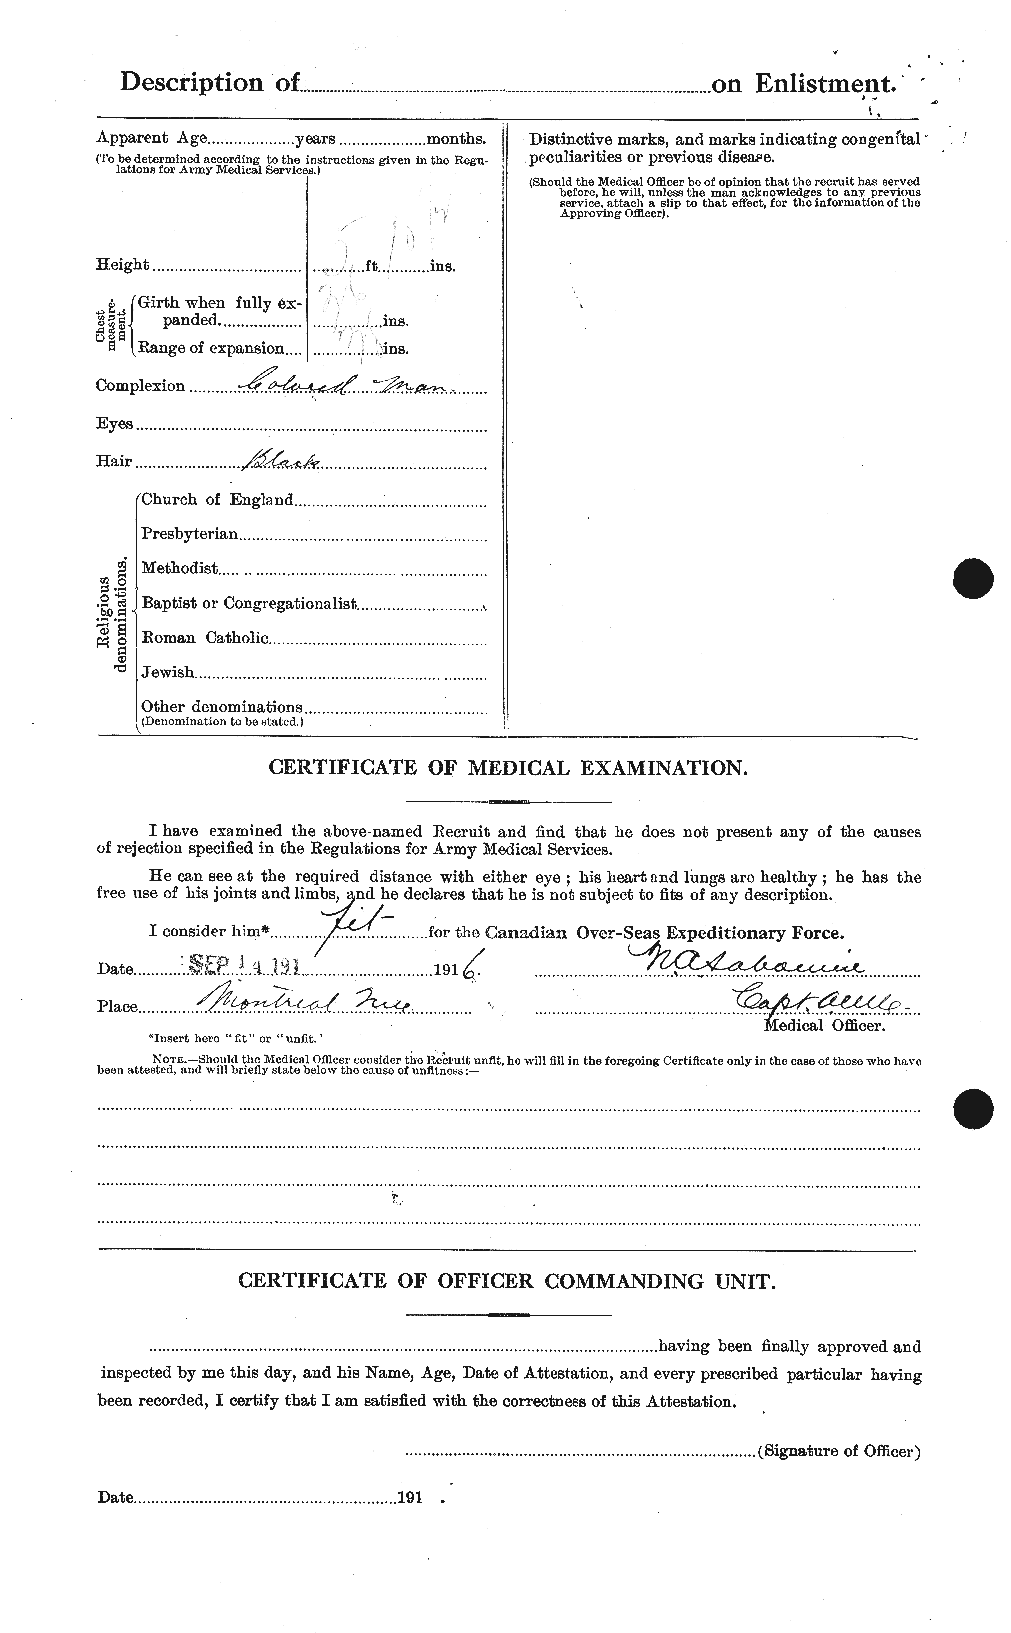 Personnel Records of the First World War - CEF 085953b